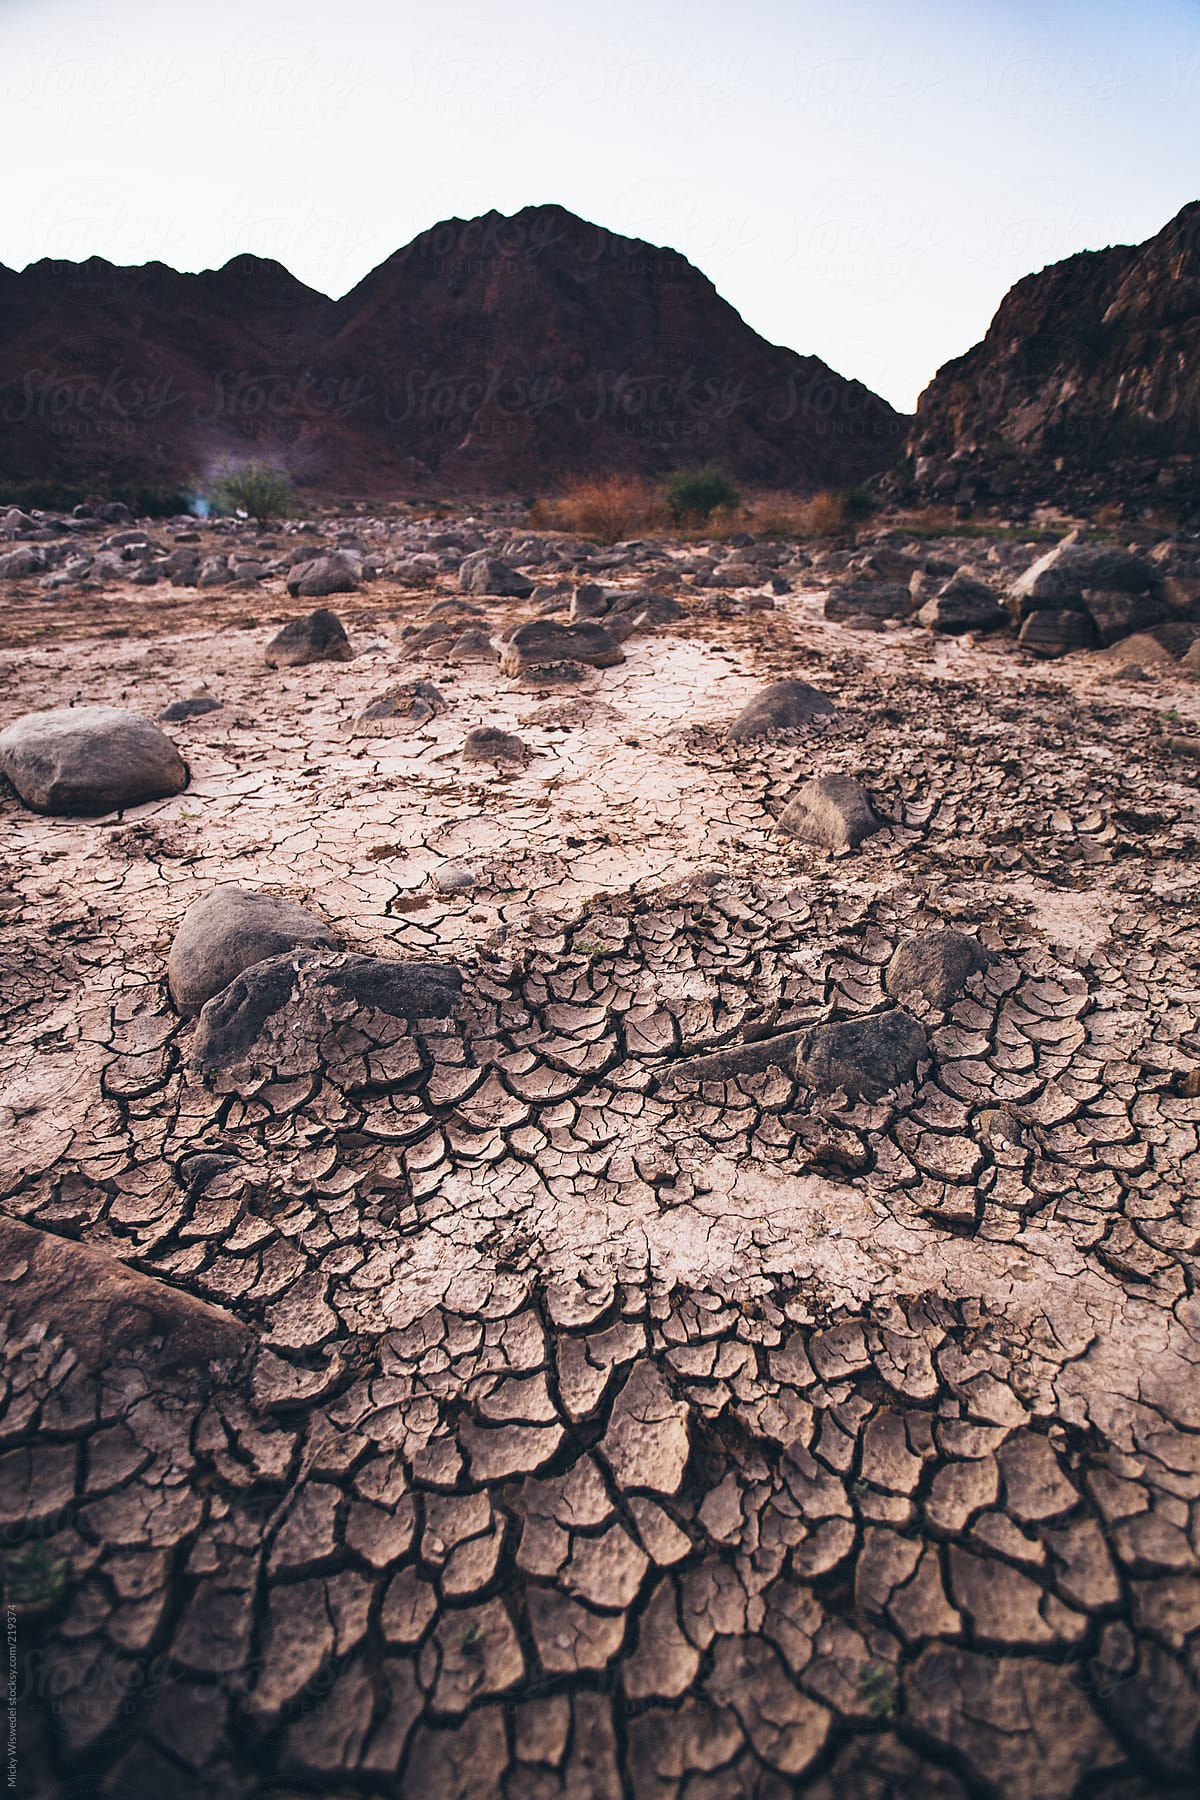 cracked mud and boulders in a dried out river bed